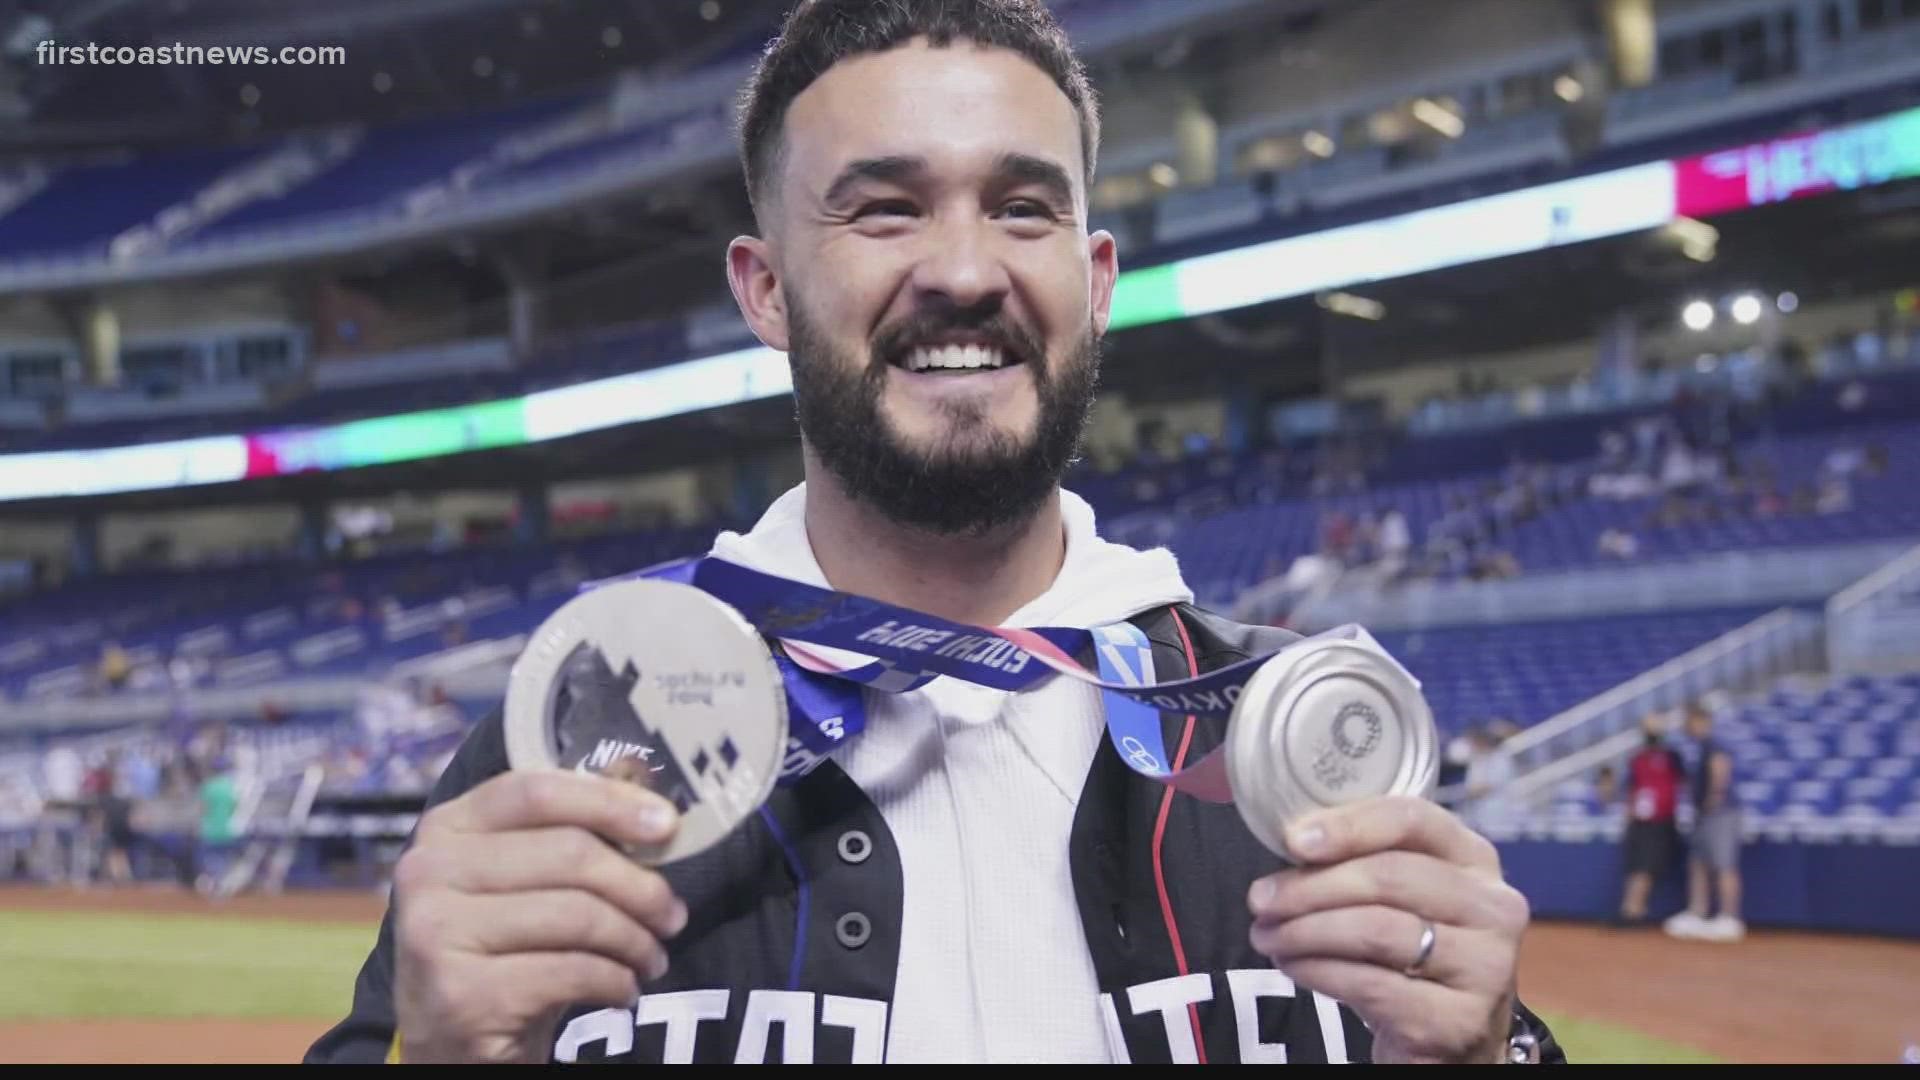 Infielder Eddy Alvarez made history last year, winning a silver medal at the Tokyo Olympics for baseball after having medaled at the winter games in speed skating.